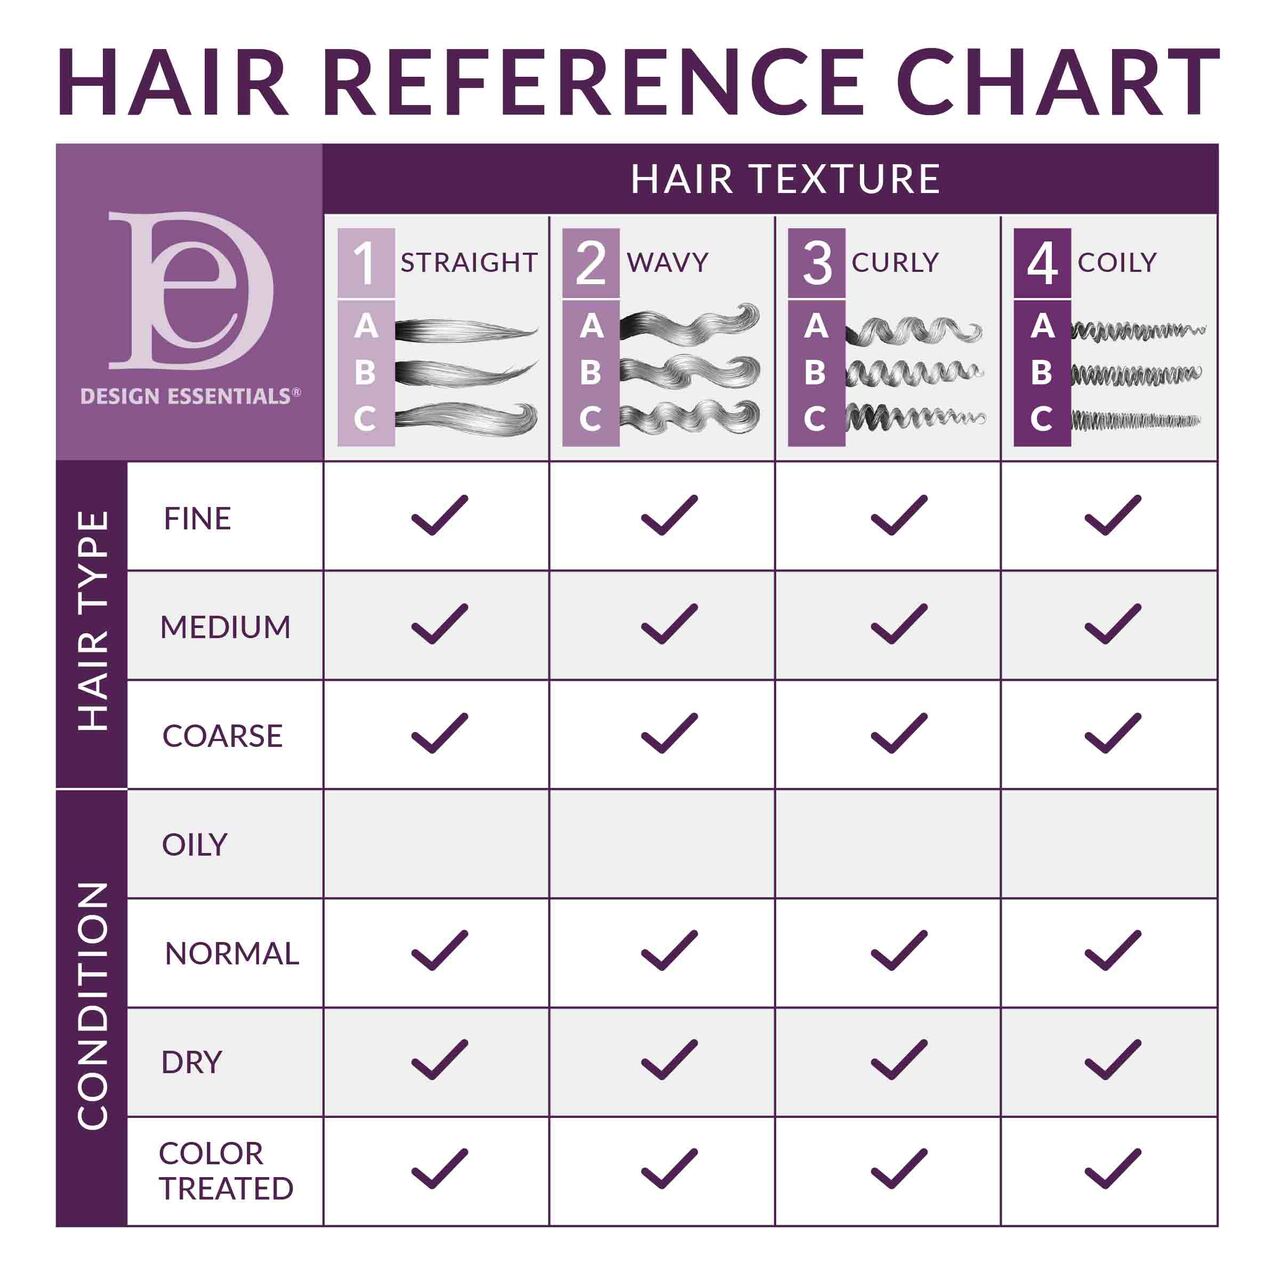 Therapeutics_Anti-Itch_Hair_Scalp_Treatment_-_Hair_Reference_Chart__28931.1581807490